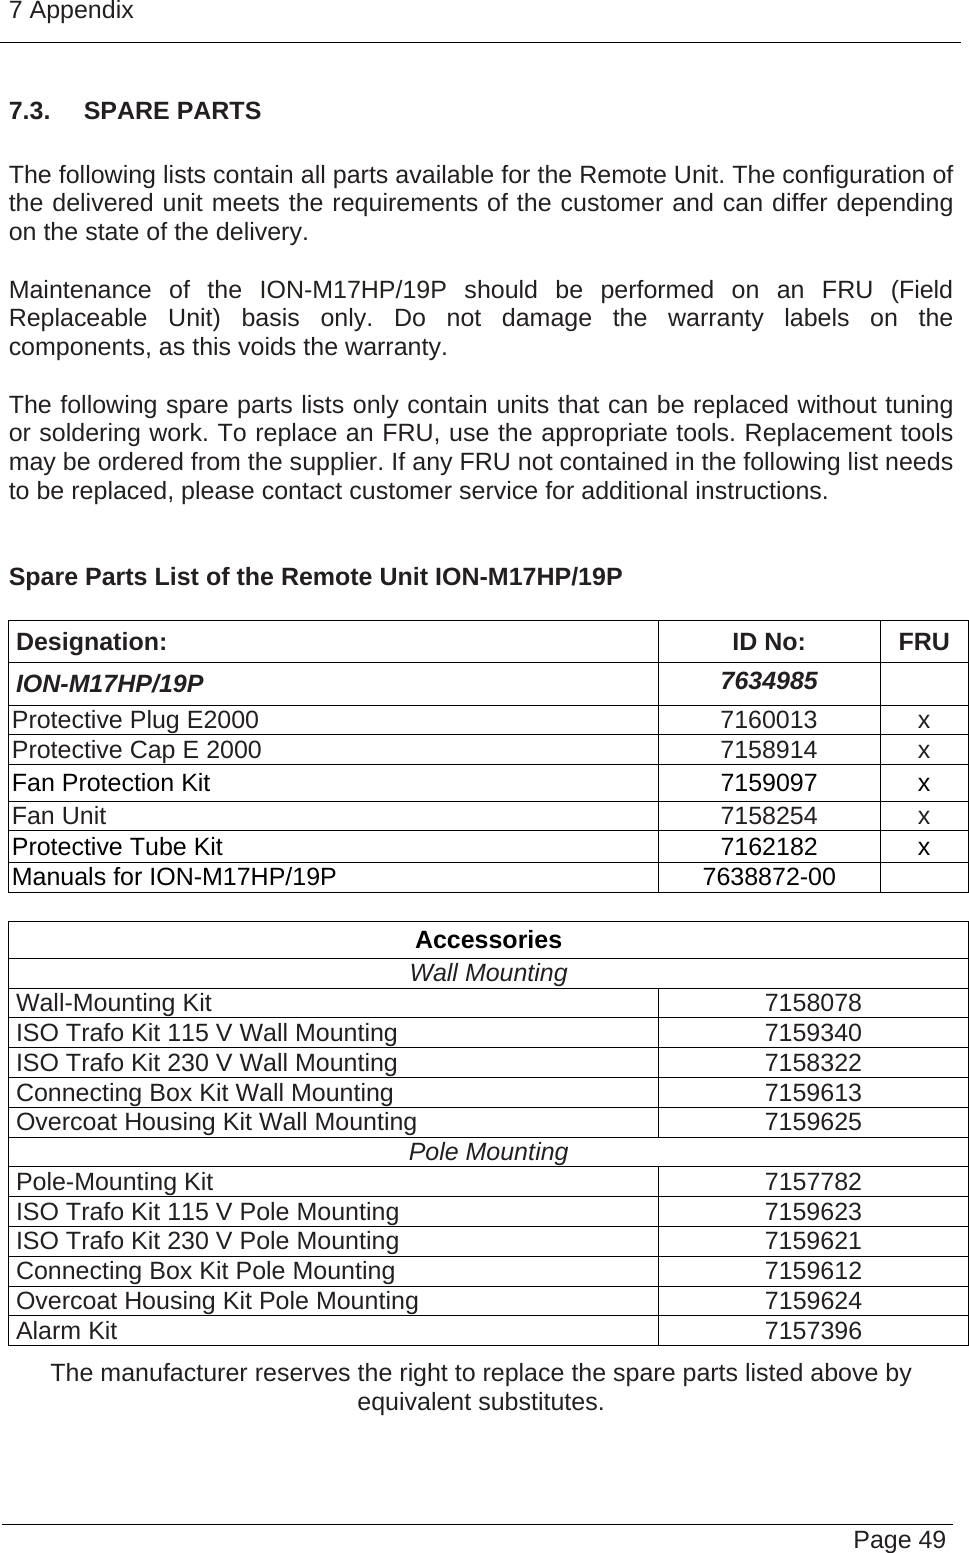 7 Appendix   Page 49 7.3.  SPARE PARTS  The following lists contain all parts available for the Remote Unit. The configuration of the delivered unit meets the requirements of the customer and can differ depending on the state of the delivery.  Maintenance of the ION-M17HP/19P should be performed on an FRU (Field Replaceable Unit) basis only. Do not damage the warranty labels on the components, as this voids the warranty.   The following spare parts lists only contain units that can be replaced without tuning or soldering work. To replace an FRU, use the appropriate tools. Replacement tools may be ordered from the supplier. If any FRU not contained in the following list needs to be replaced, please contact customer service for additional instructions.   Spare Parts List of the Remote Unit ION-M17HP/19P  Designation: ID No: FRU ION-M17HP/19P  7634985  Protective Plug E2000  7160013  x Protective Cap E 2000  7158914  x Fan Protection Kit  7159097  x Fan Unit  7158254  x Protective Tube Kit  7162182  x Manuals for ION-M17HP/19P  7638872-00    Accessories Wall Mounting Wall-Mounting Kit  7158078 ISO Trafo Kit 115 V Wall Mounting  7159340 ISO Trafo Kit 230 V Wall Mounting  7158322 Connecting Box Kit Wall Mounting  7159613 Overcoat Housing Kit Wall Mounting  7159625 Pole Mounting  Pole-Mounting Kit  7157782 ISO Trafo Kit 115 V Pole Mounting  7159623 ISO Trafo Kit 230 V Pole Mounting  7159621 Connecting Box Kit Pole Mounting  7159612 Overcoat Housing Kit Pole Mounting  7159624 Alarm Kit  7157396 The manufacturer reserves the right to replace the spare parts listed above by equivalent substitutes.  